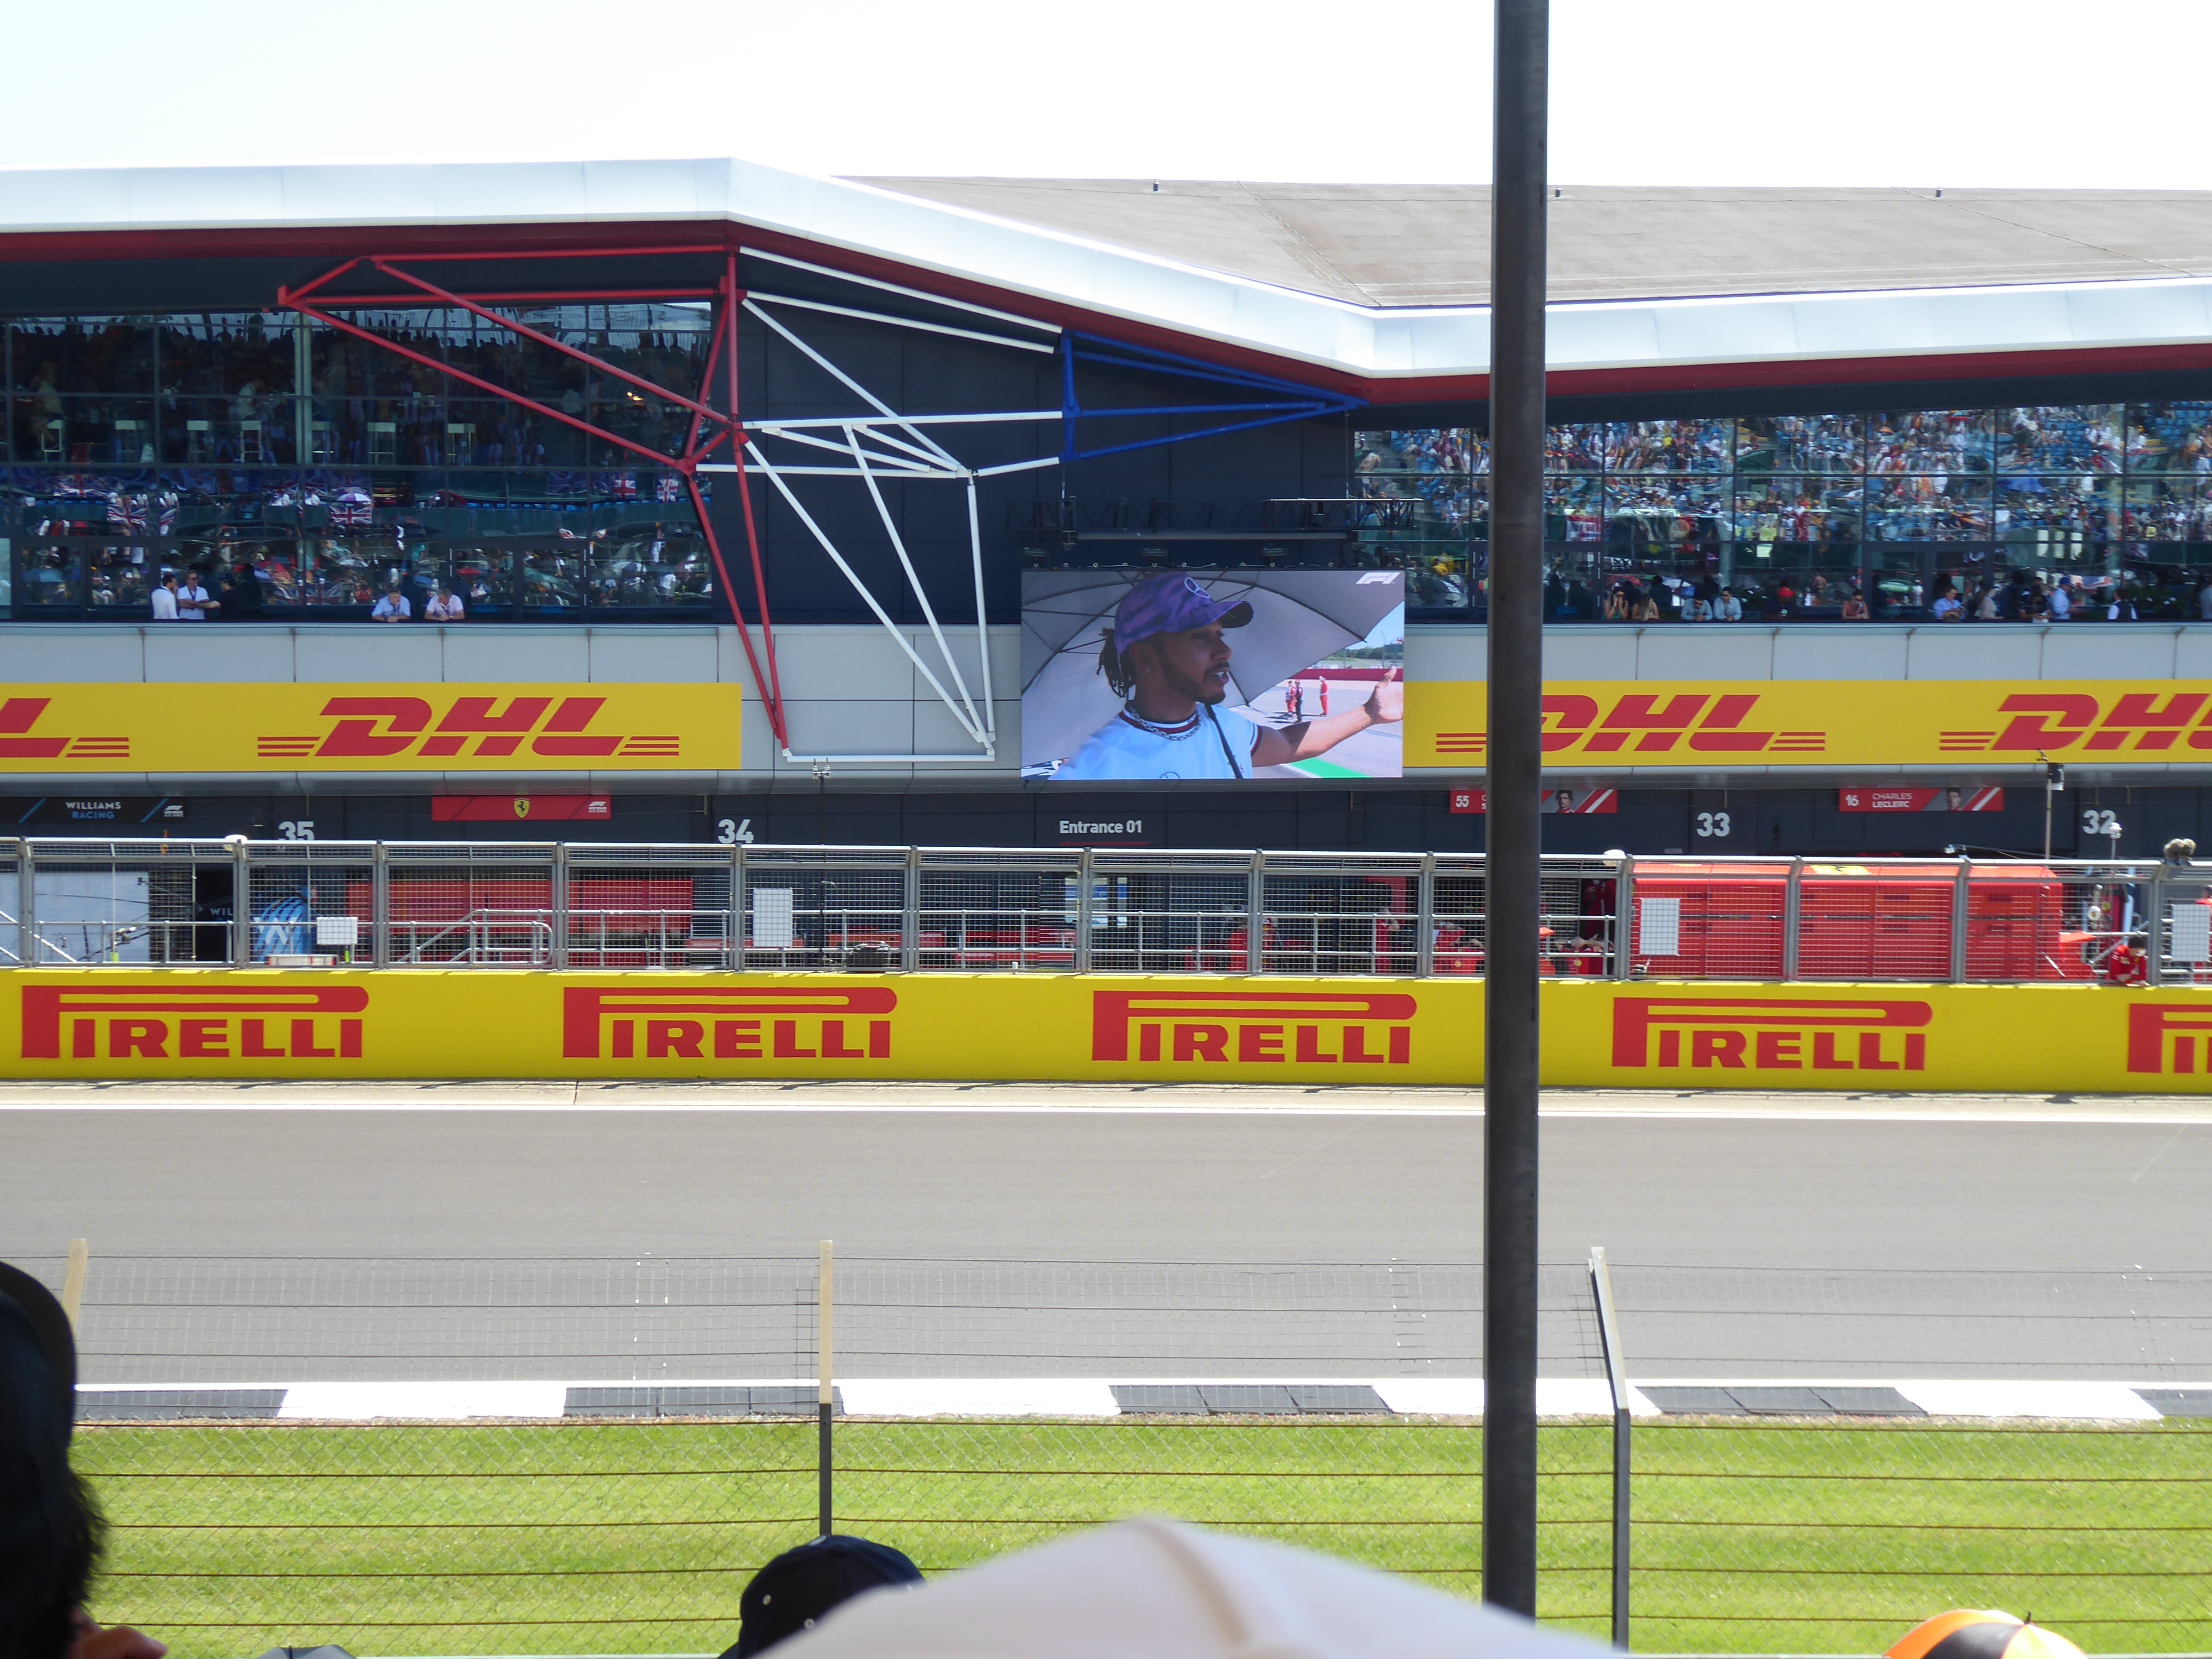 F1 Silverstone Grand Prix As Seen From Abbey Grandstand Jake Kuyser